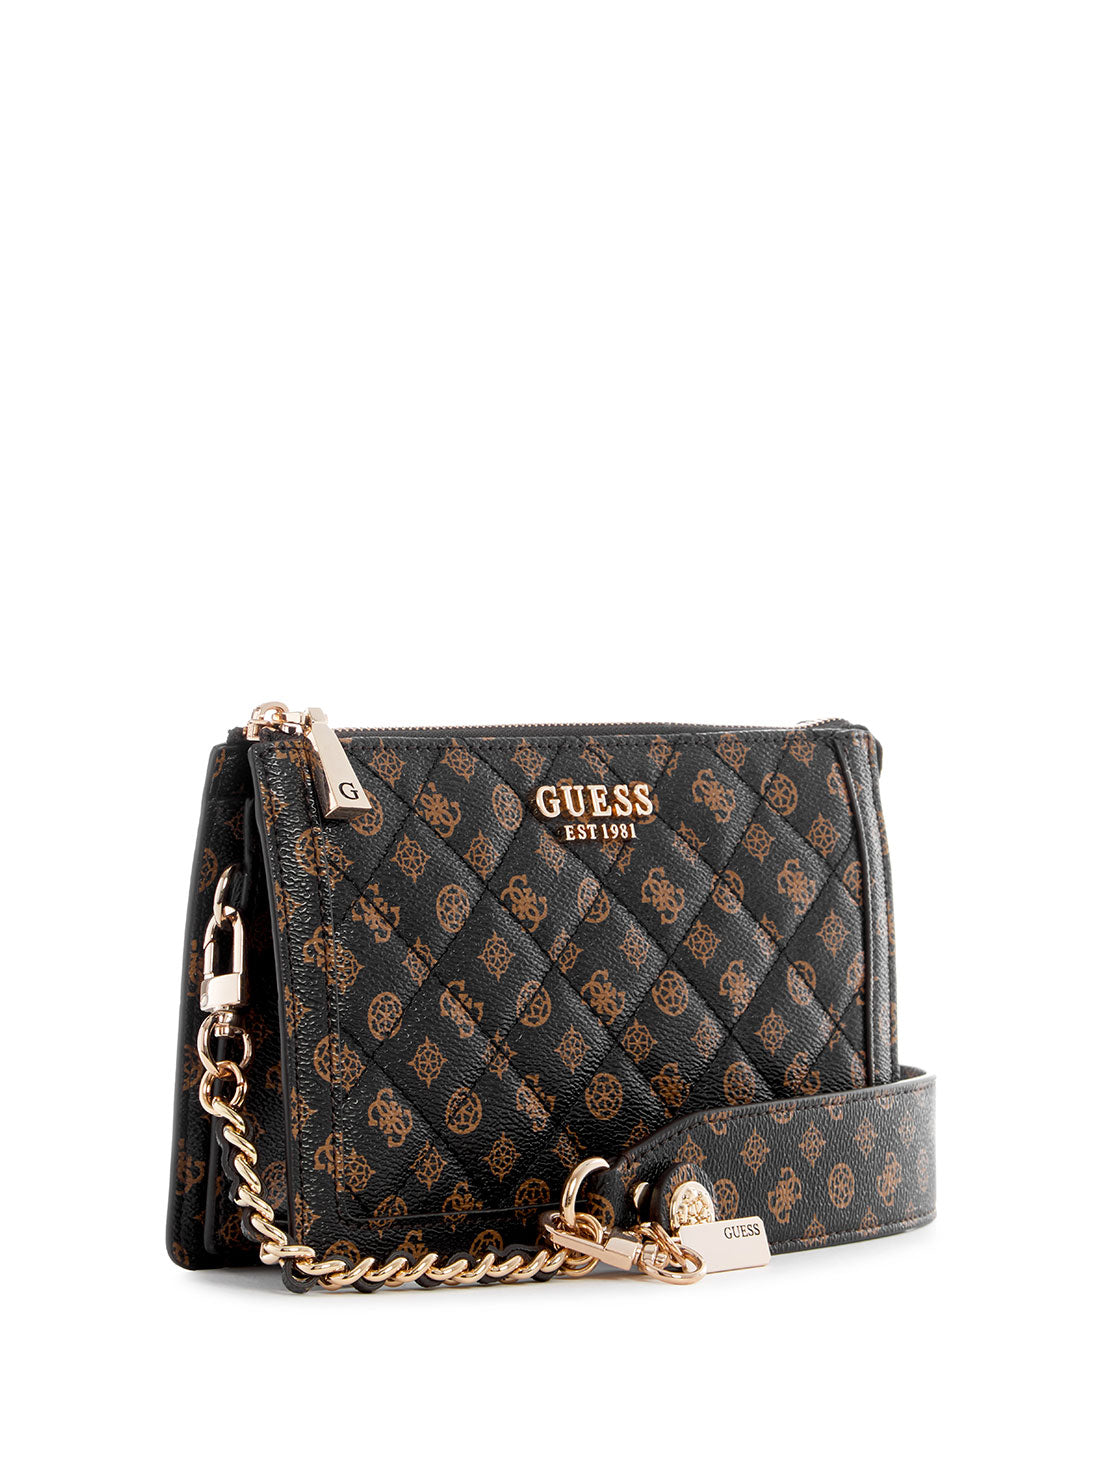 Guess Abey Multi Compartment Crossbody Bag